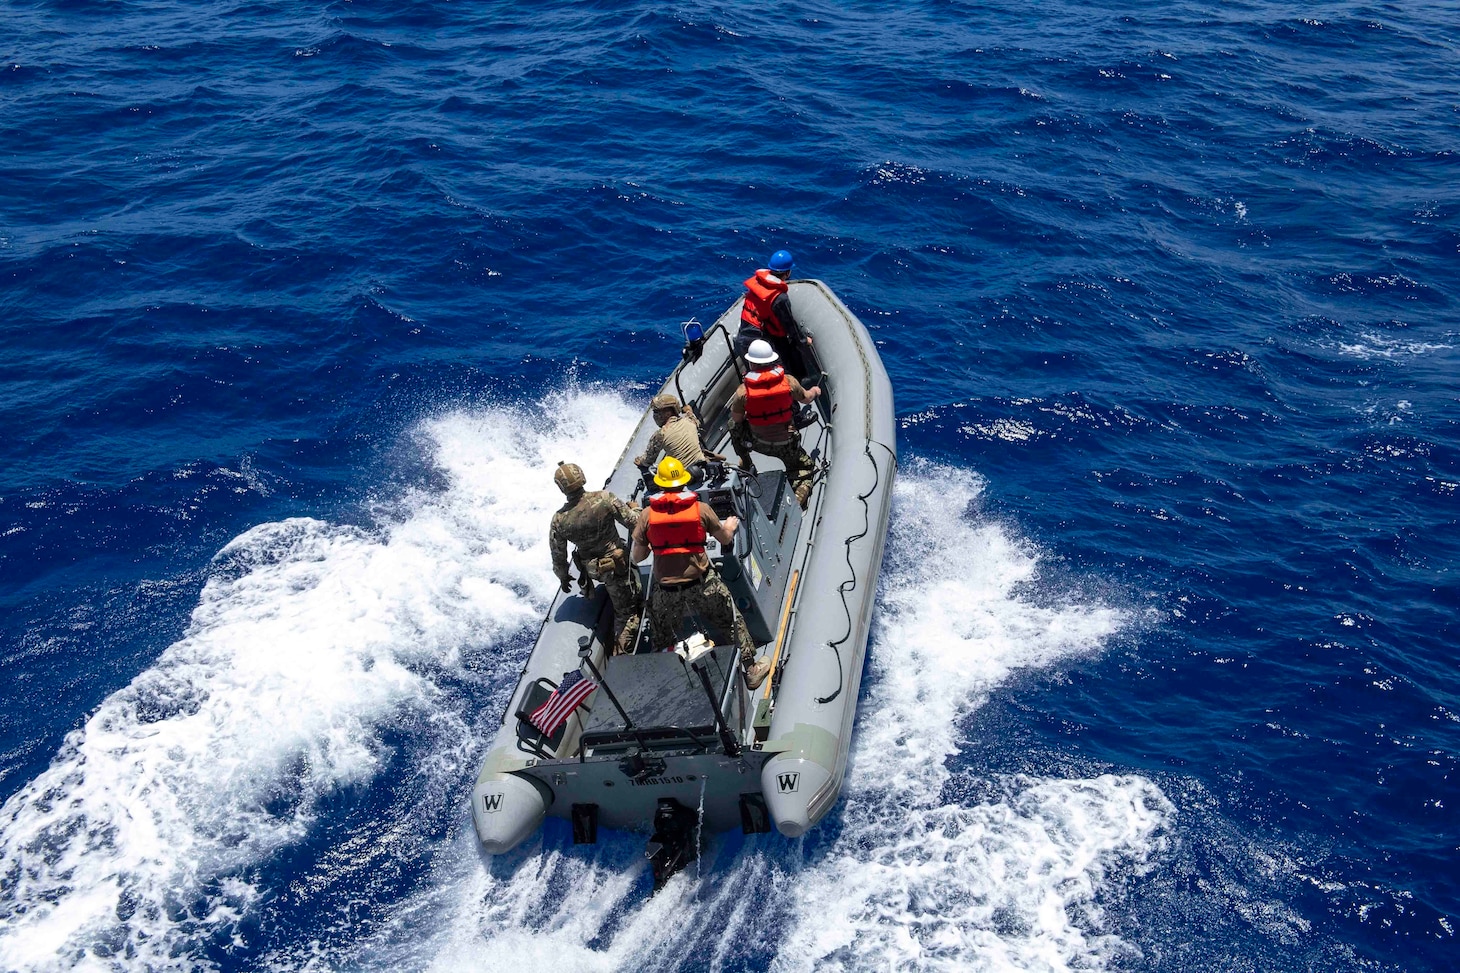 Members of the U.S. Coast Guard  Law Enforcement Detachment 104 and Sailors assigned to Independence-variant littoral combat ship USS Charleston (LCS 18) ride in a rigid-hull inflatable boat.